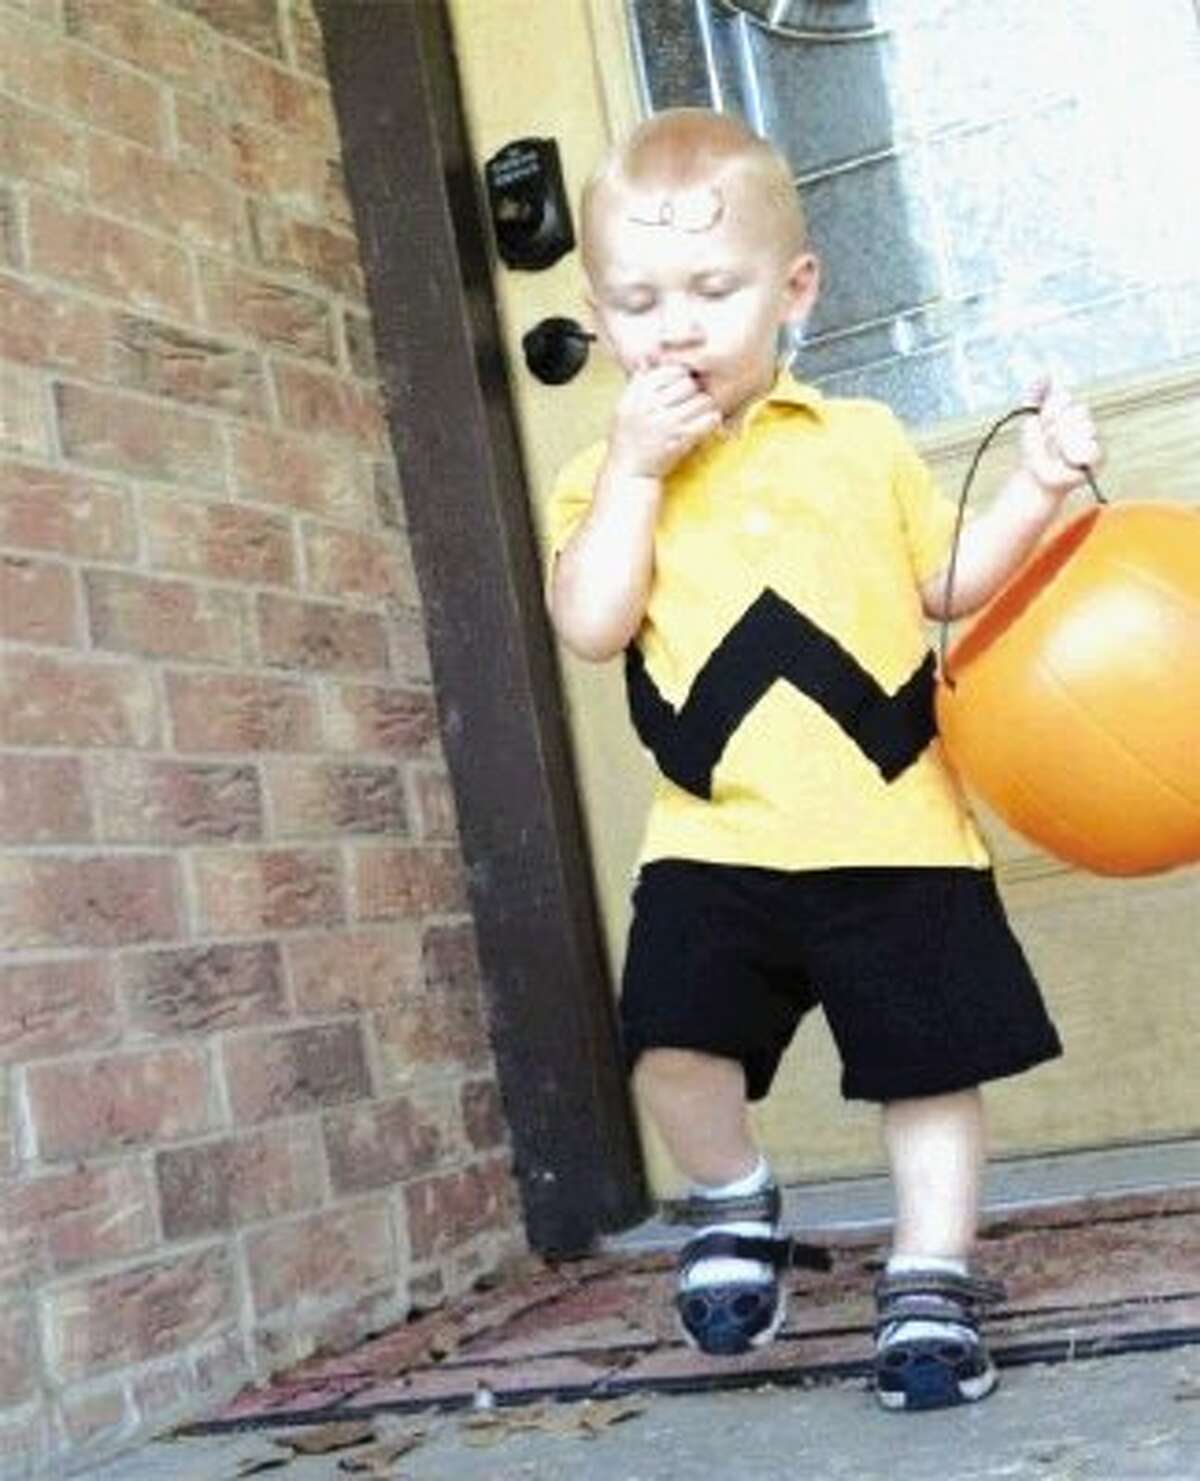 Marshall Ward, 20 months old, was tragically killed in an auto accident at his home in Tarkington around 5 p.m. Wednesday. He was the son of Jason and Leah Ward, who are Tarkington volunteer firefighters. This photo was one that was submitted to the Cleveland Advocate’s Halloween costume contest last year.